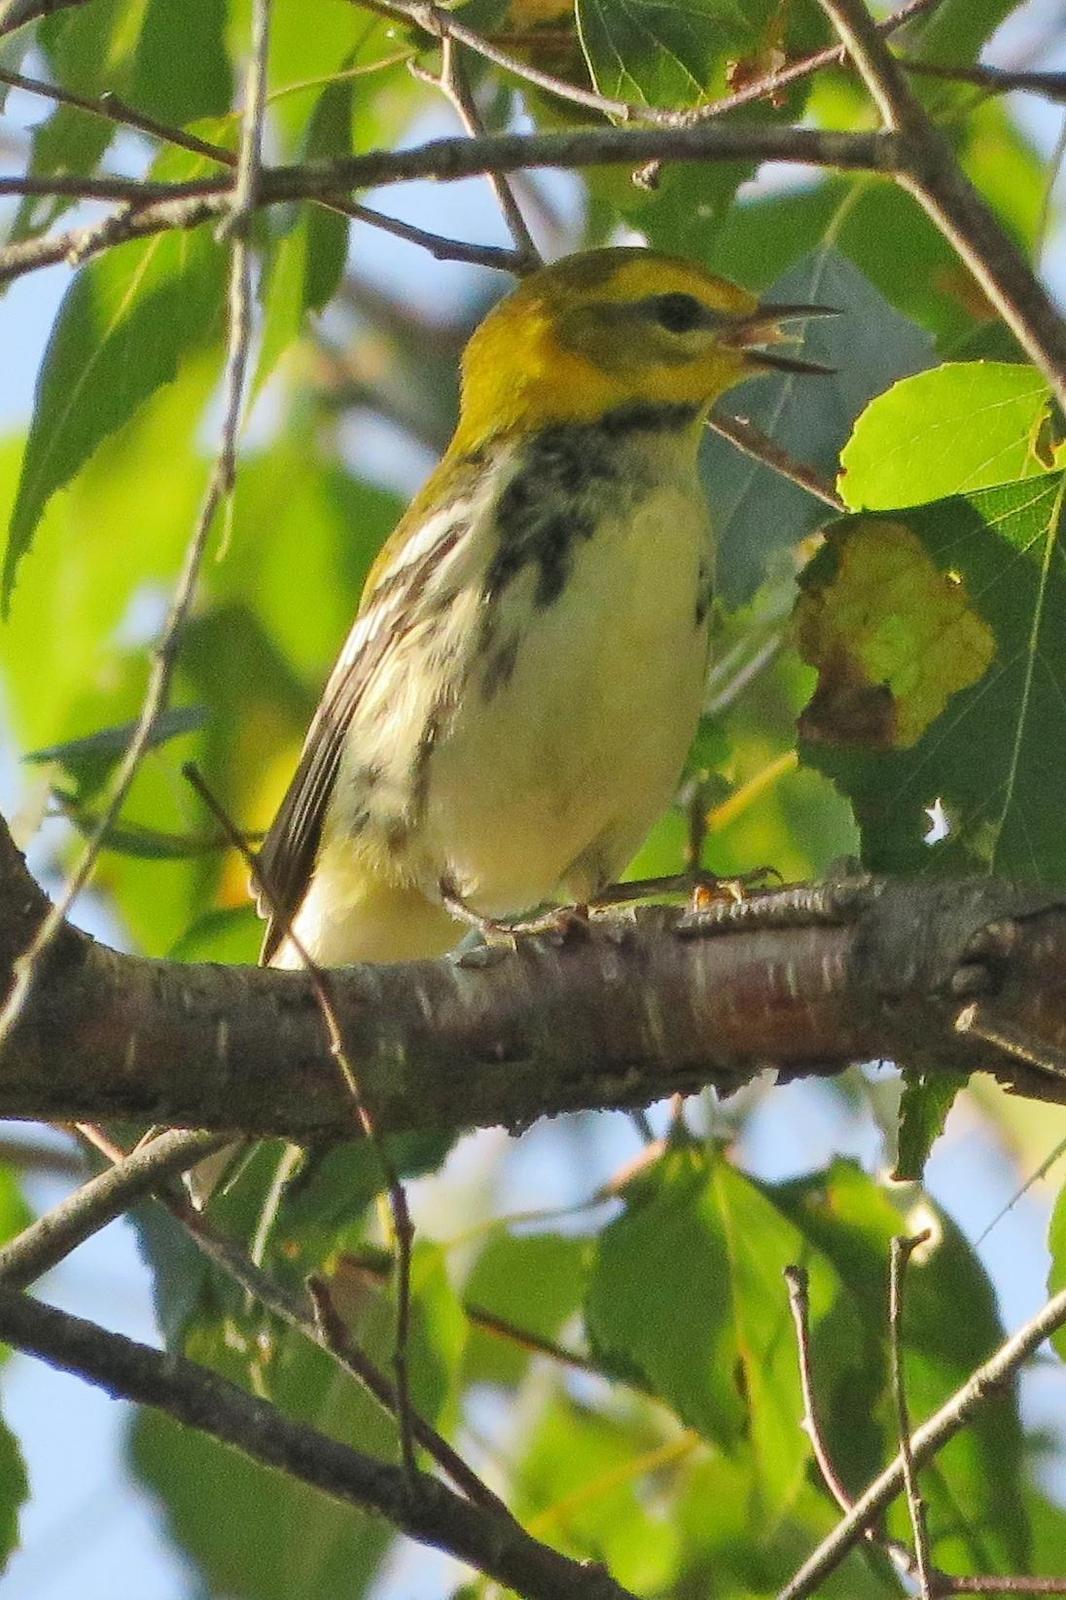 Black-throated Green Warbler Photo by Bob Neugebauer